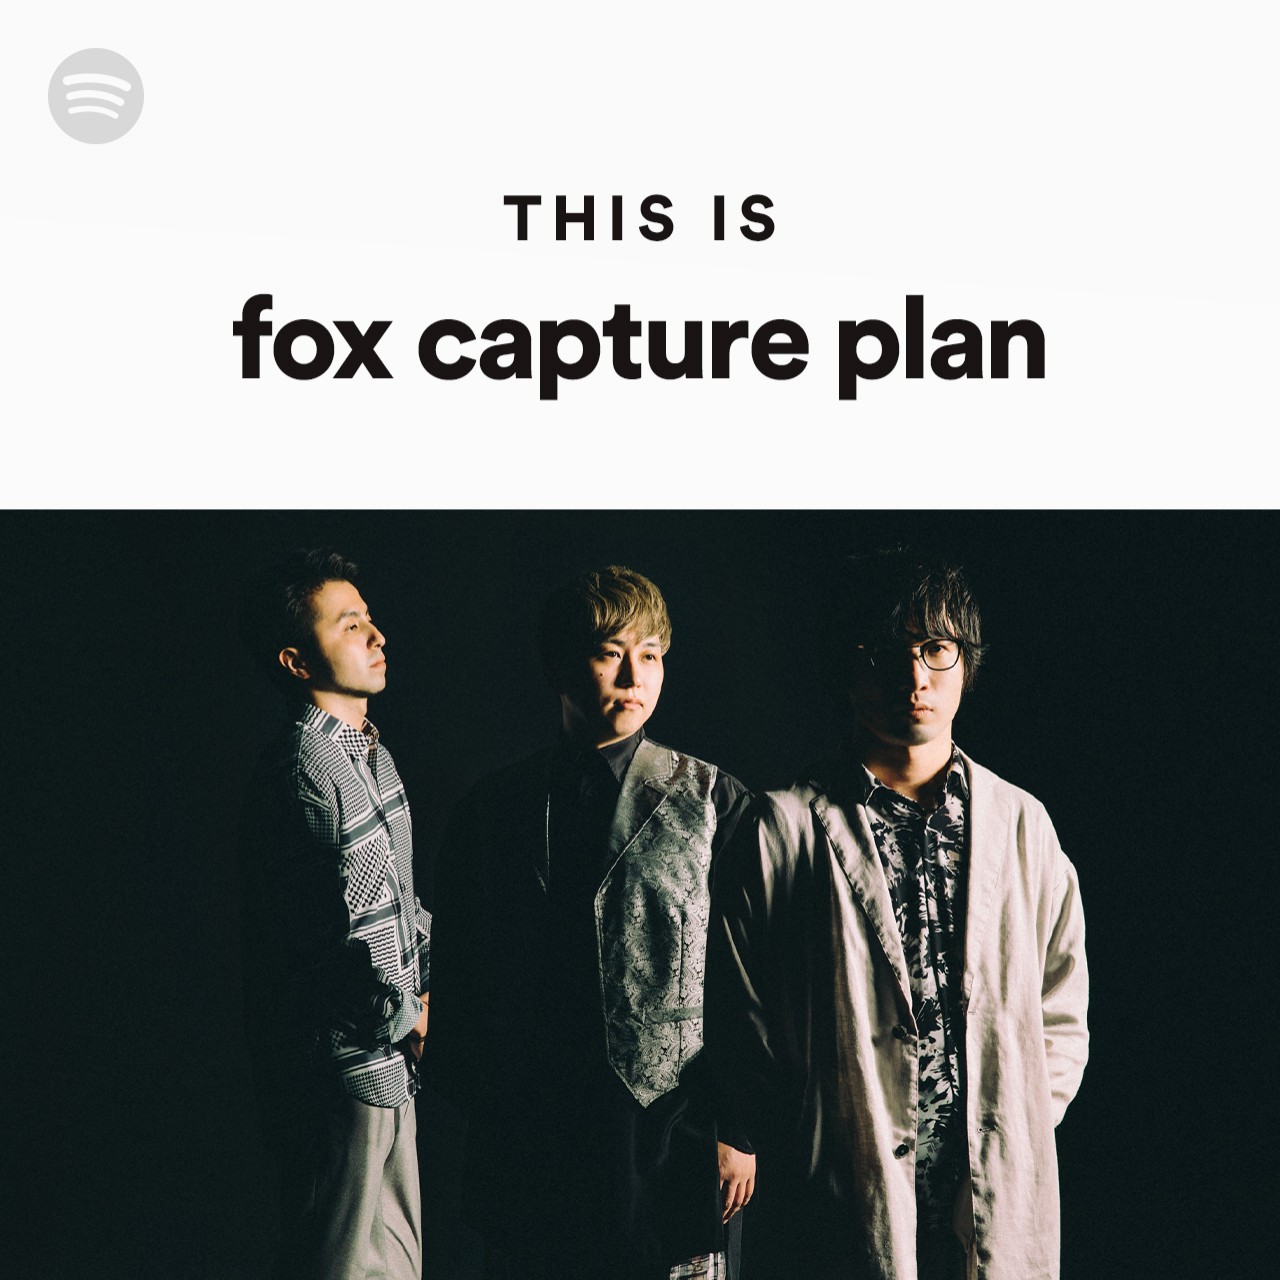 This Is fox capture plan